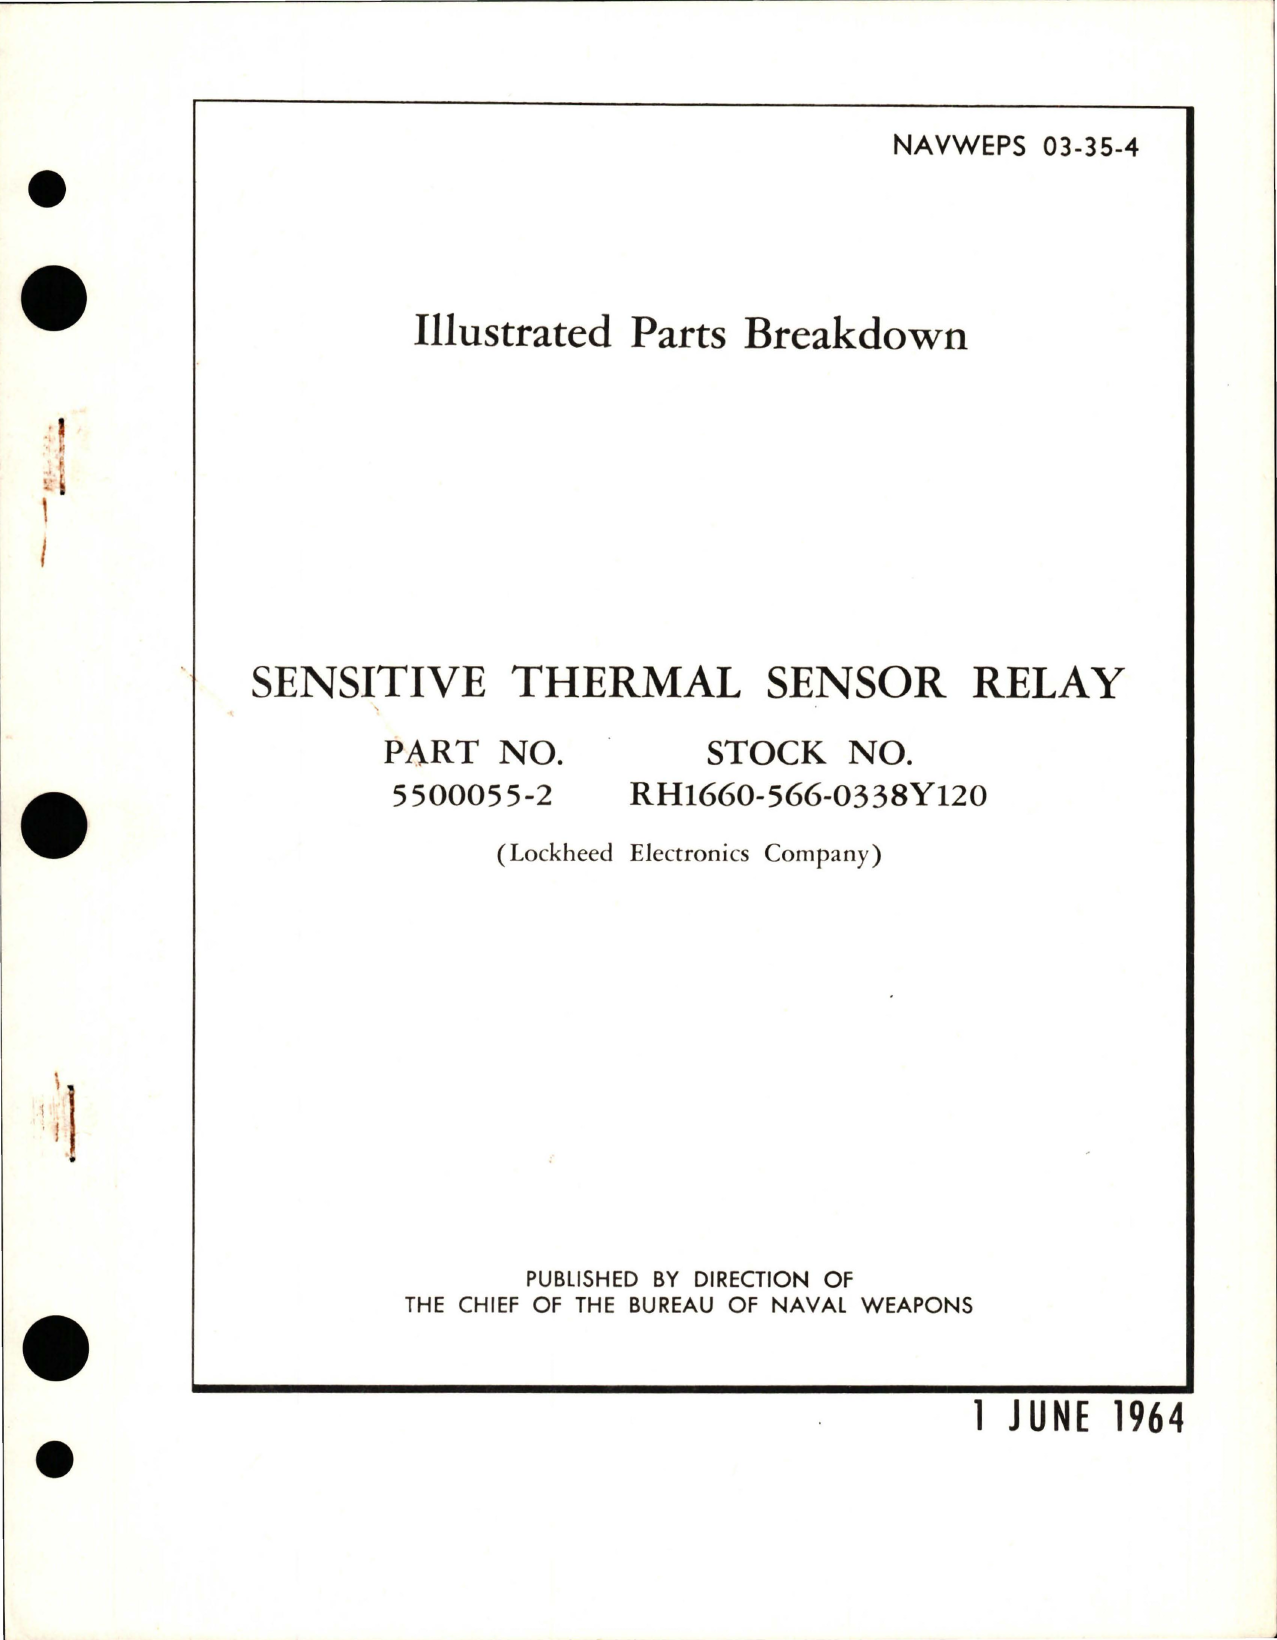 Sample page 1 from AirCorps Library document: Illustrated Parts Breakdown for Sensitive Thermal Sensor Relay - Part 5500055-2